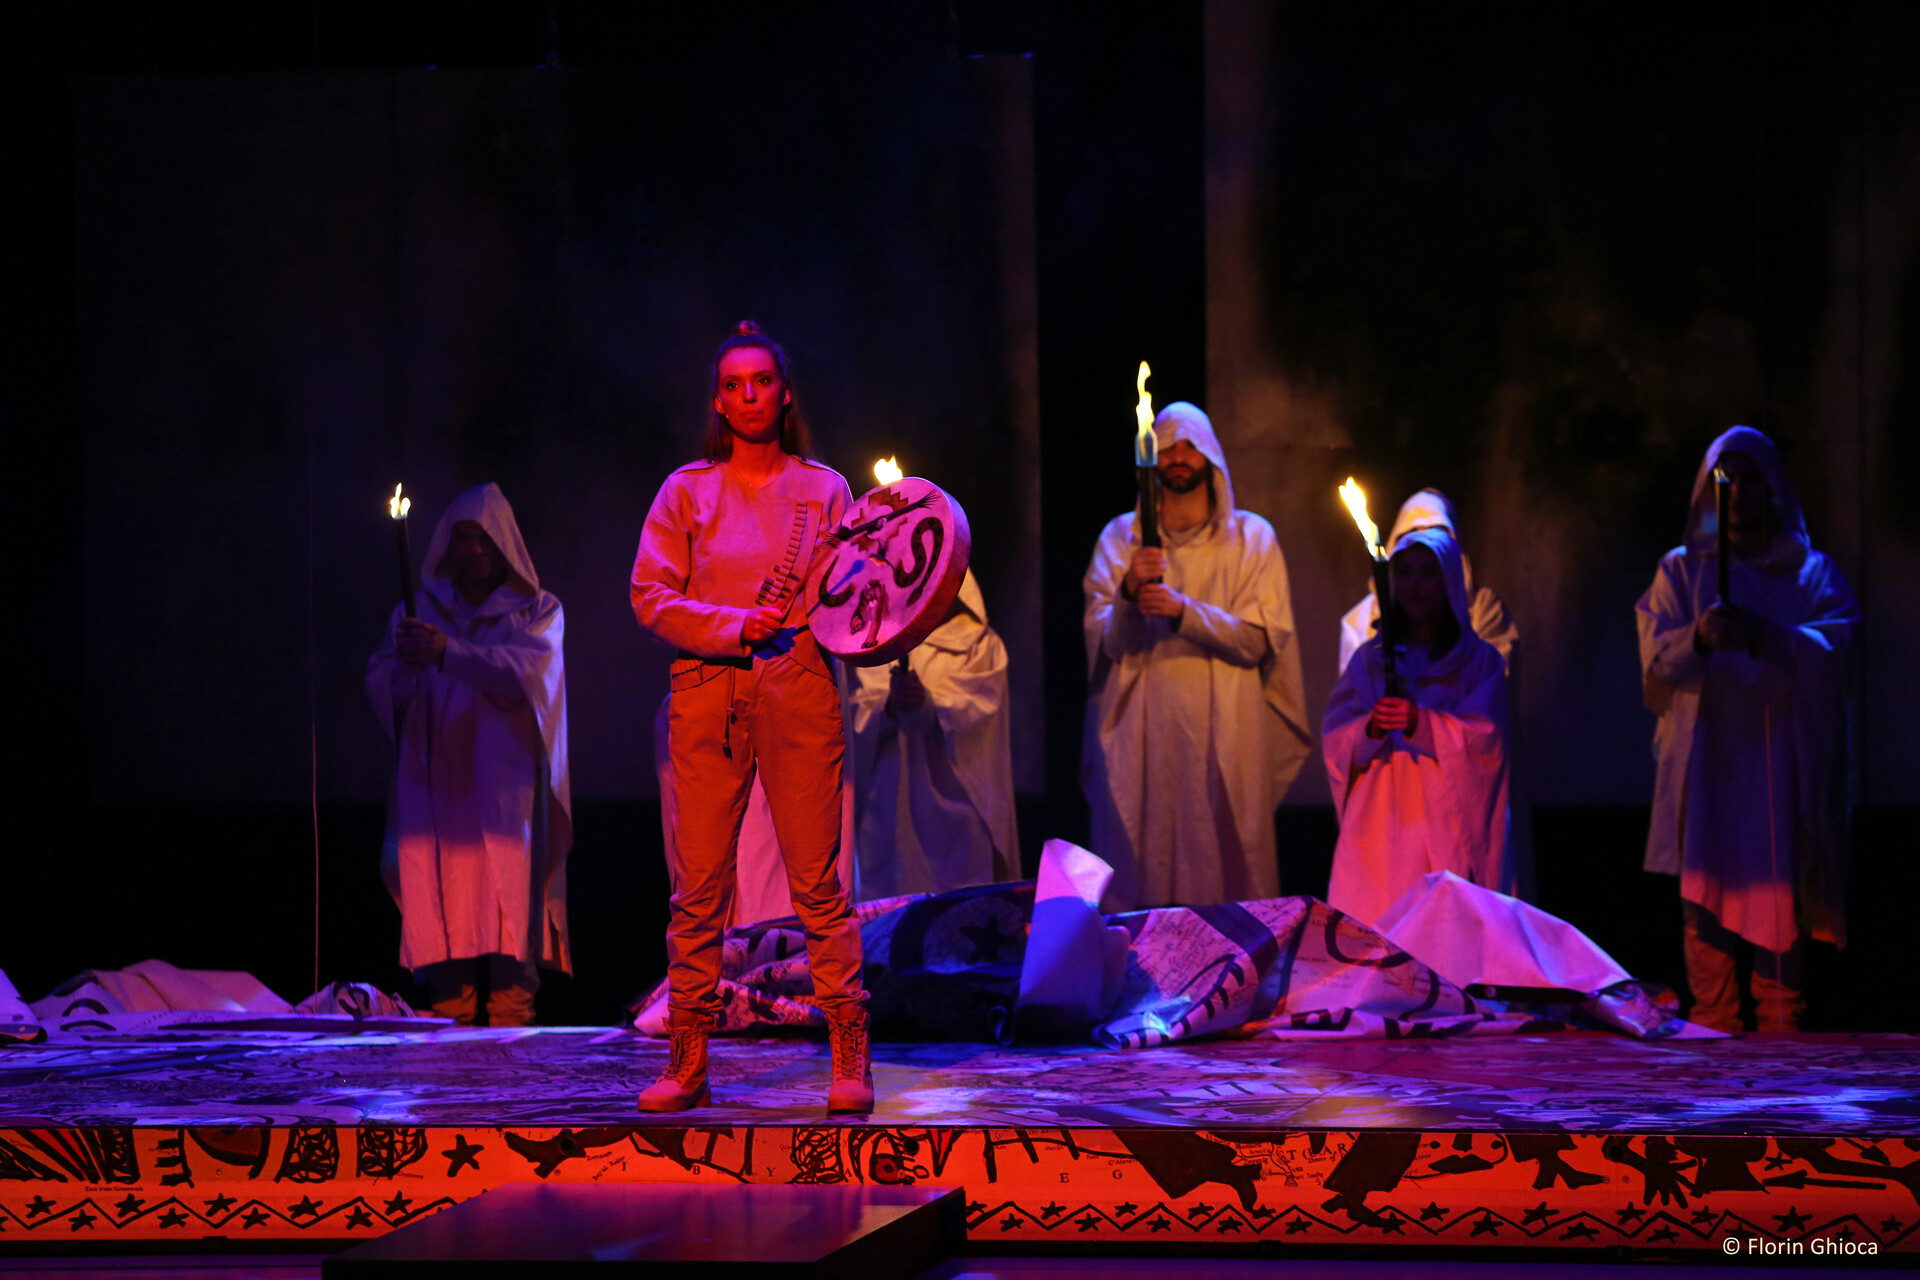 performers onstage in hoods holding torches, one person standing and holding a drum